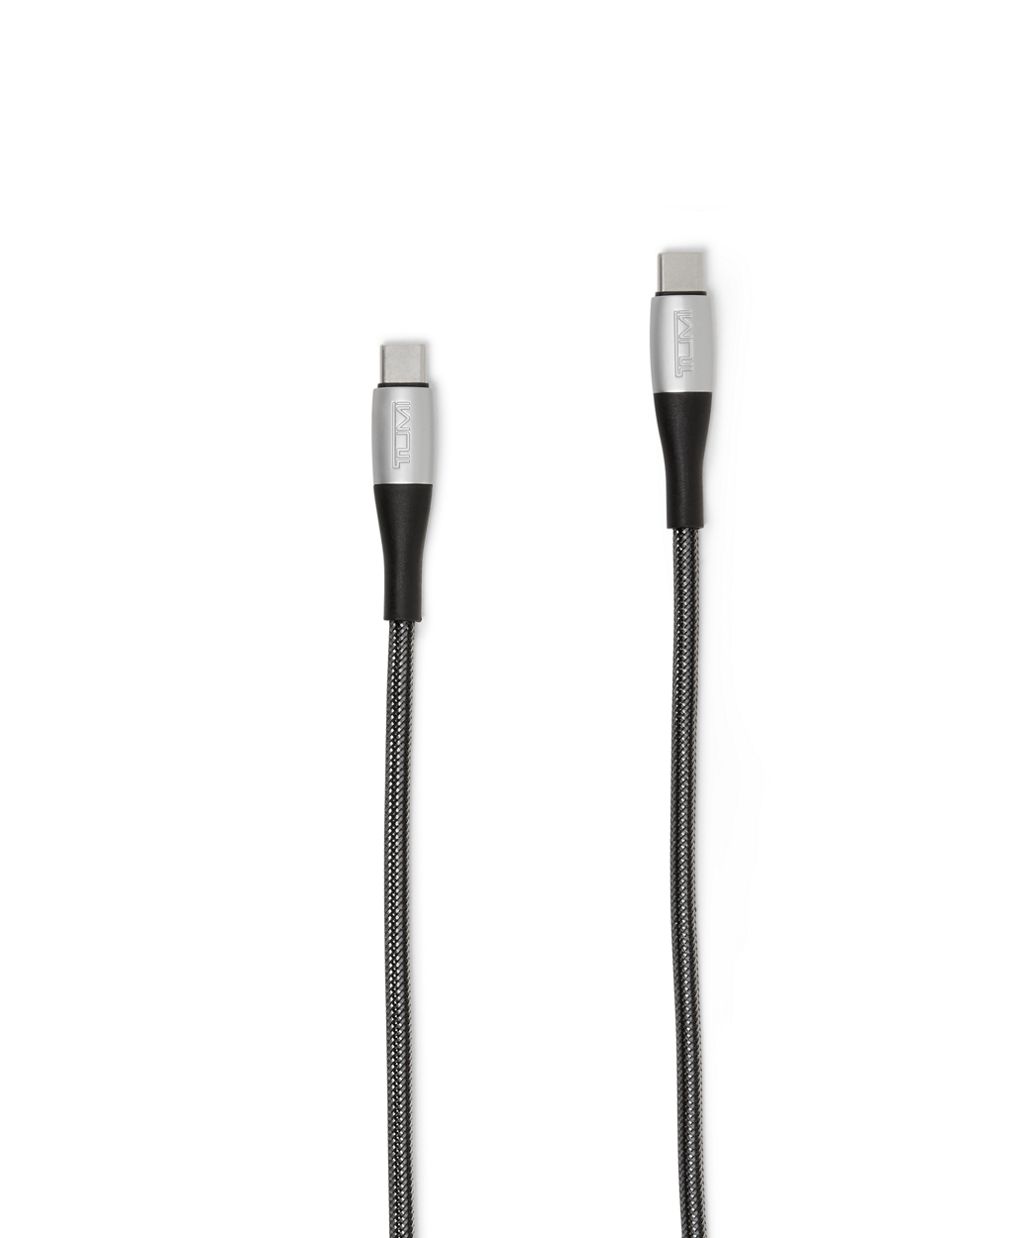 Black Dragon USB Lightning Cable for Apple iDevices - 1.5 meter